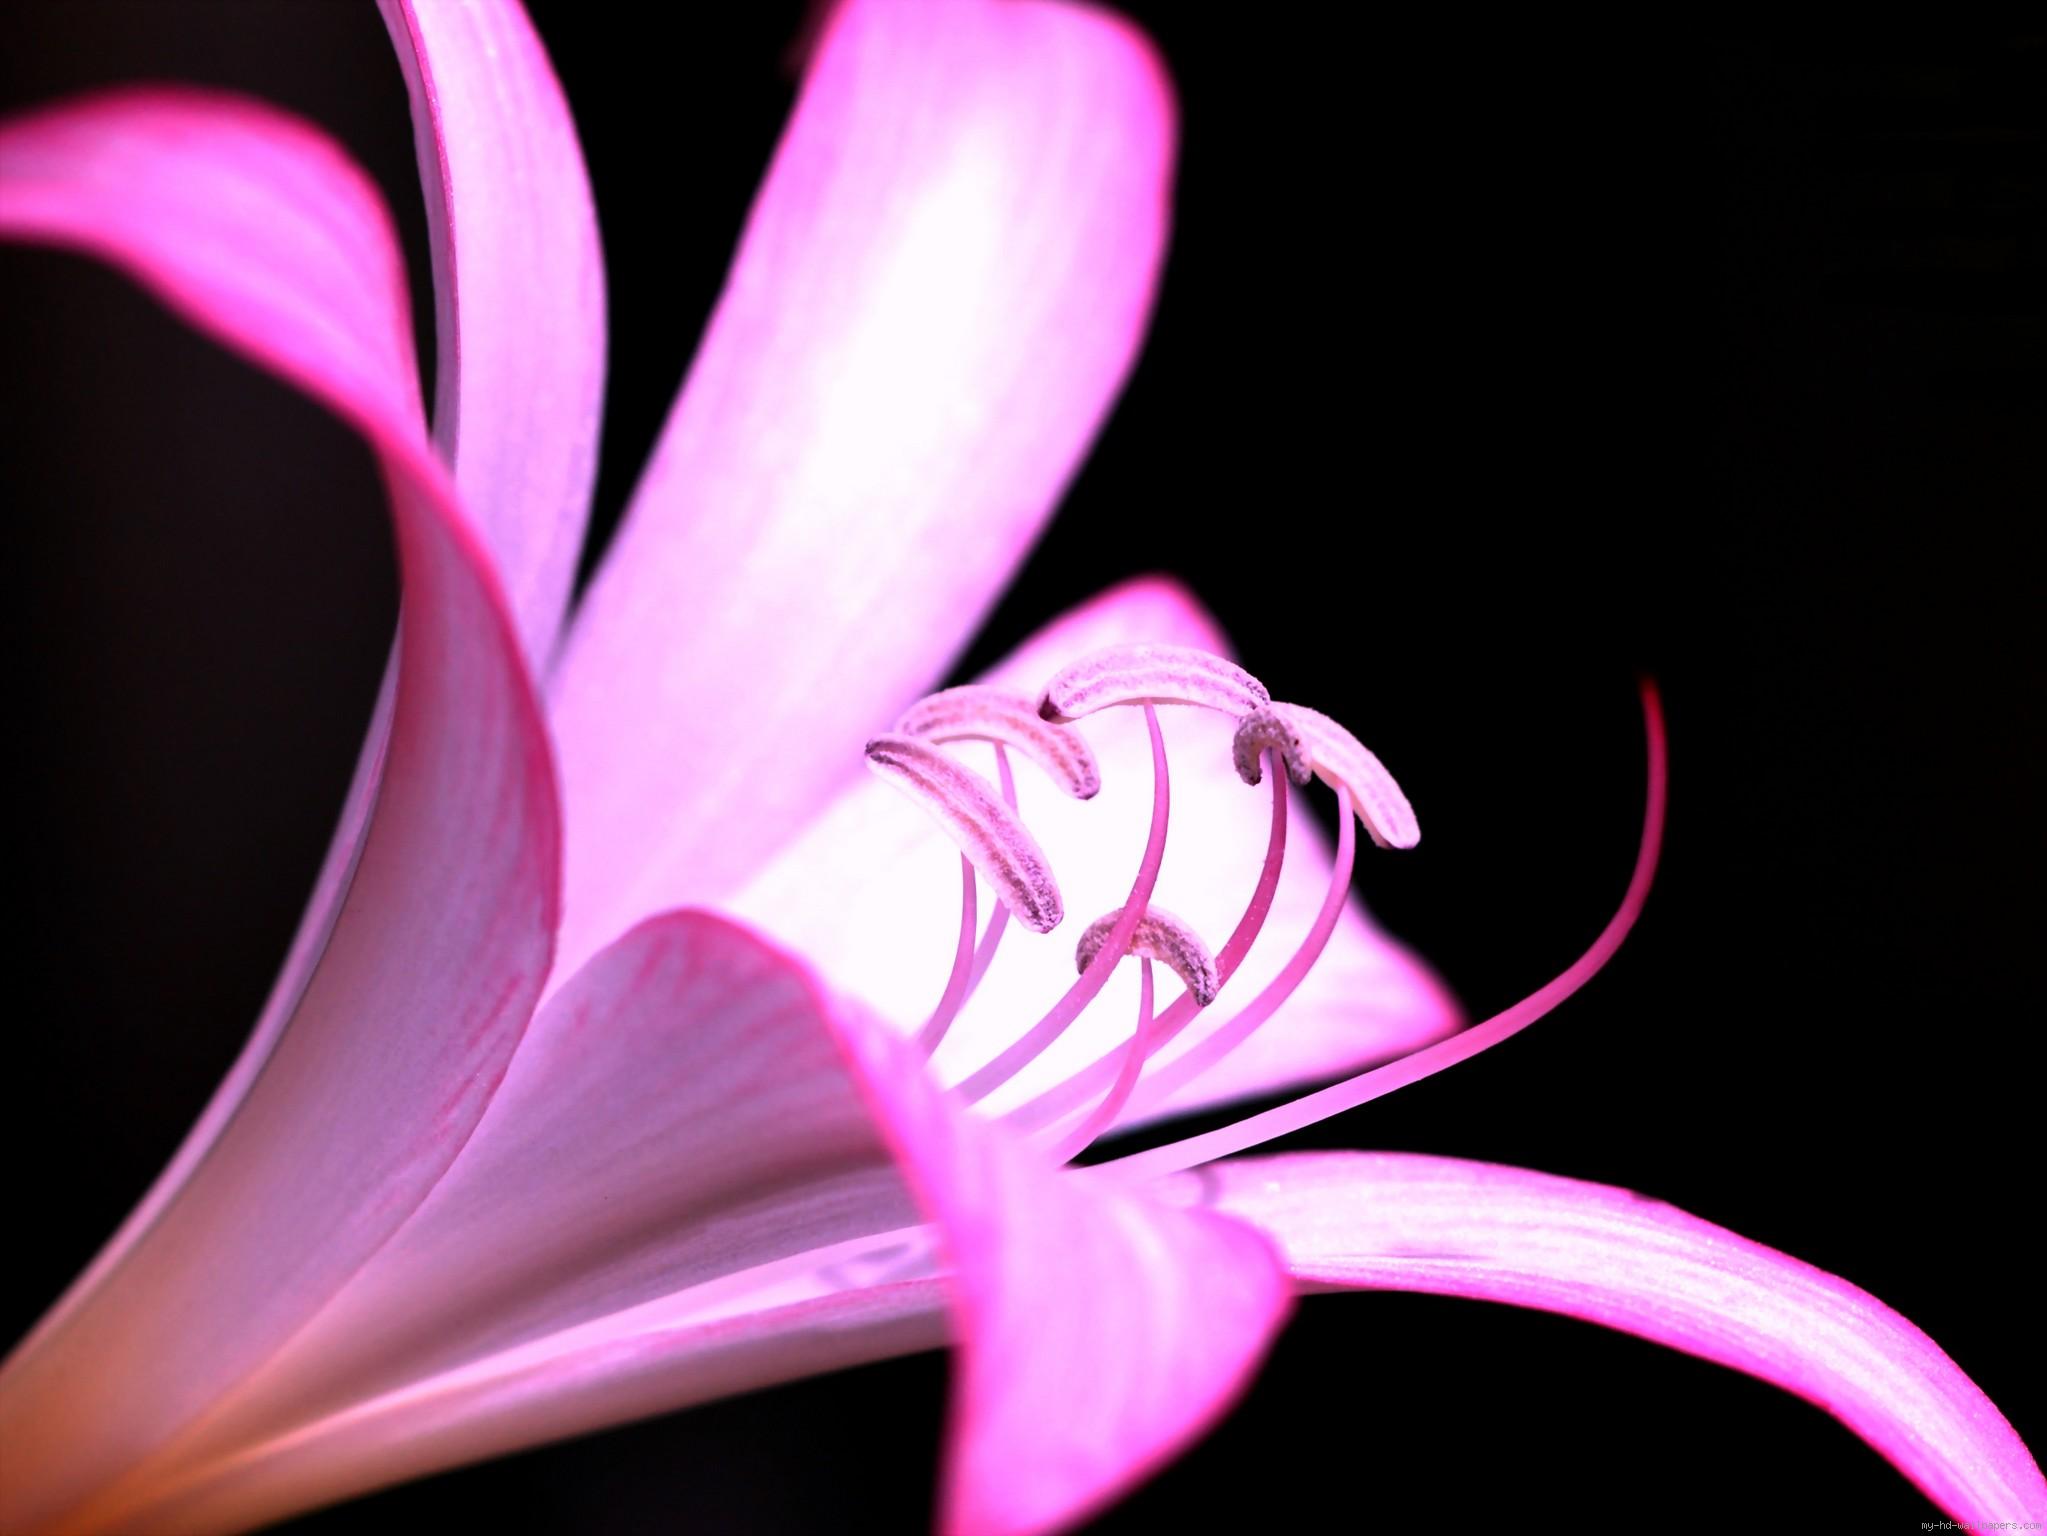 Pink Flower on a black background wallpaper | nature and ...